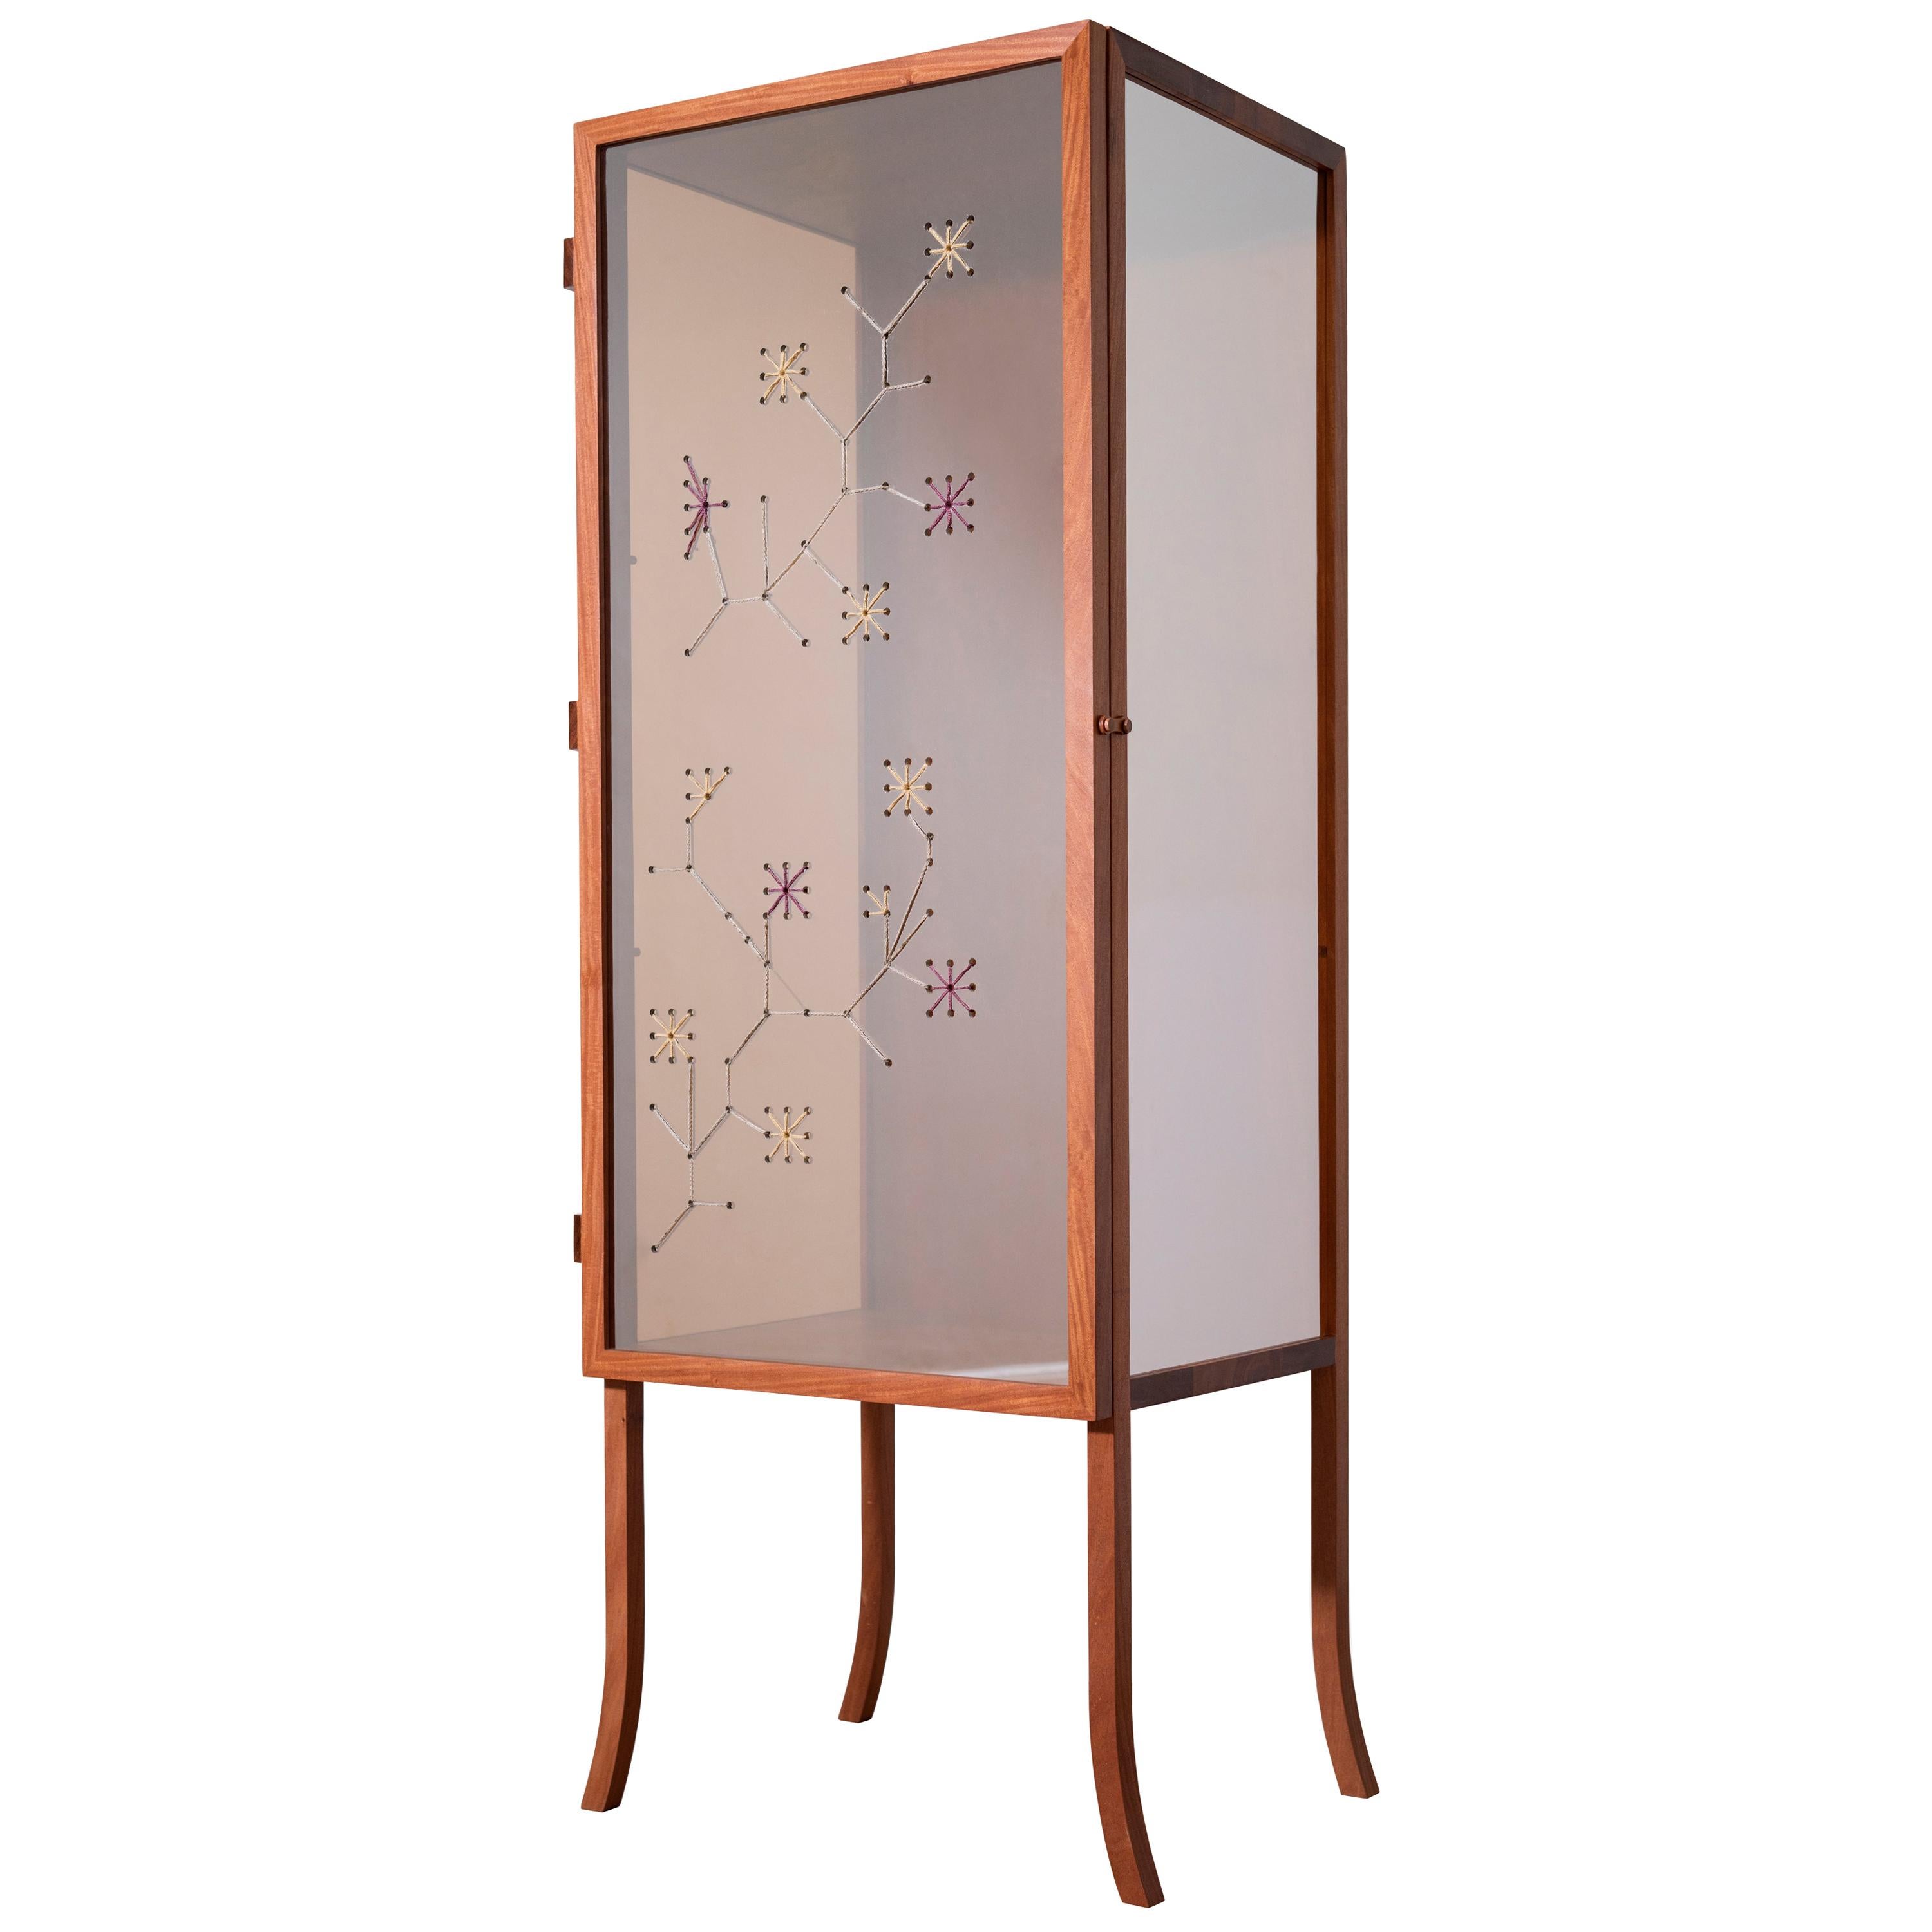 Brocado Cabinet: handmade in Brazil with cabreúva wood and embroidered glass For Sale